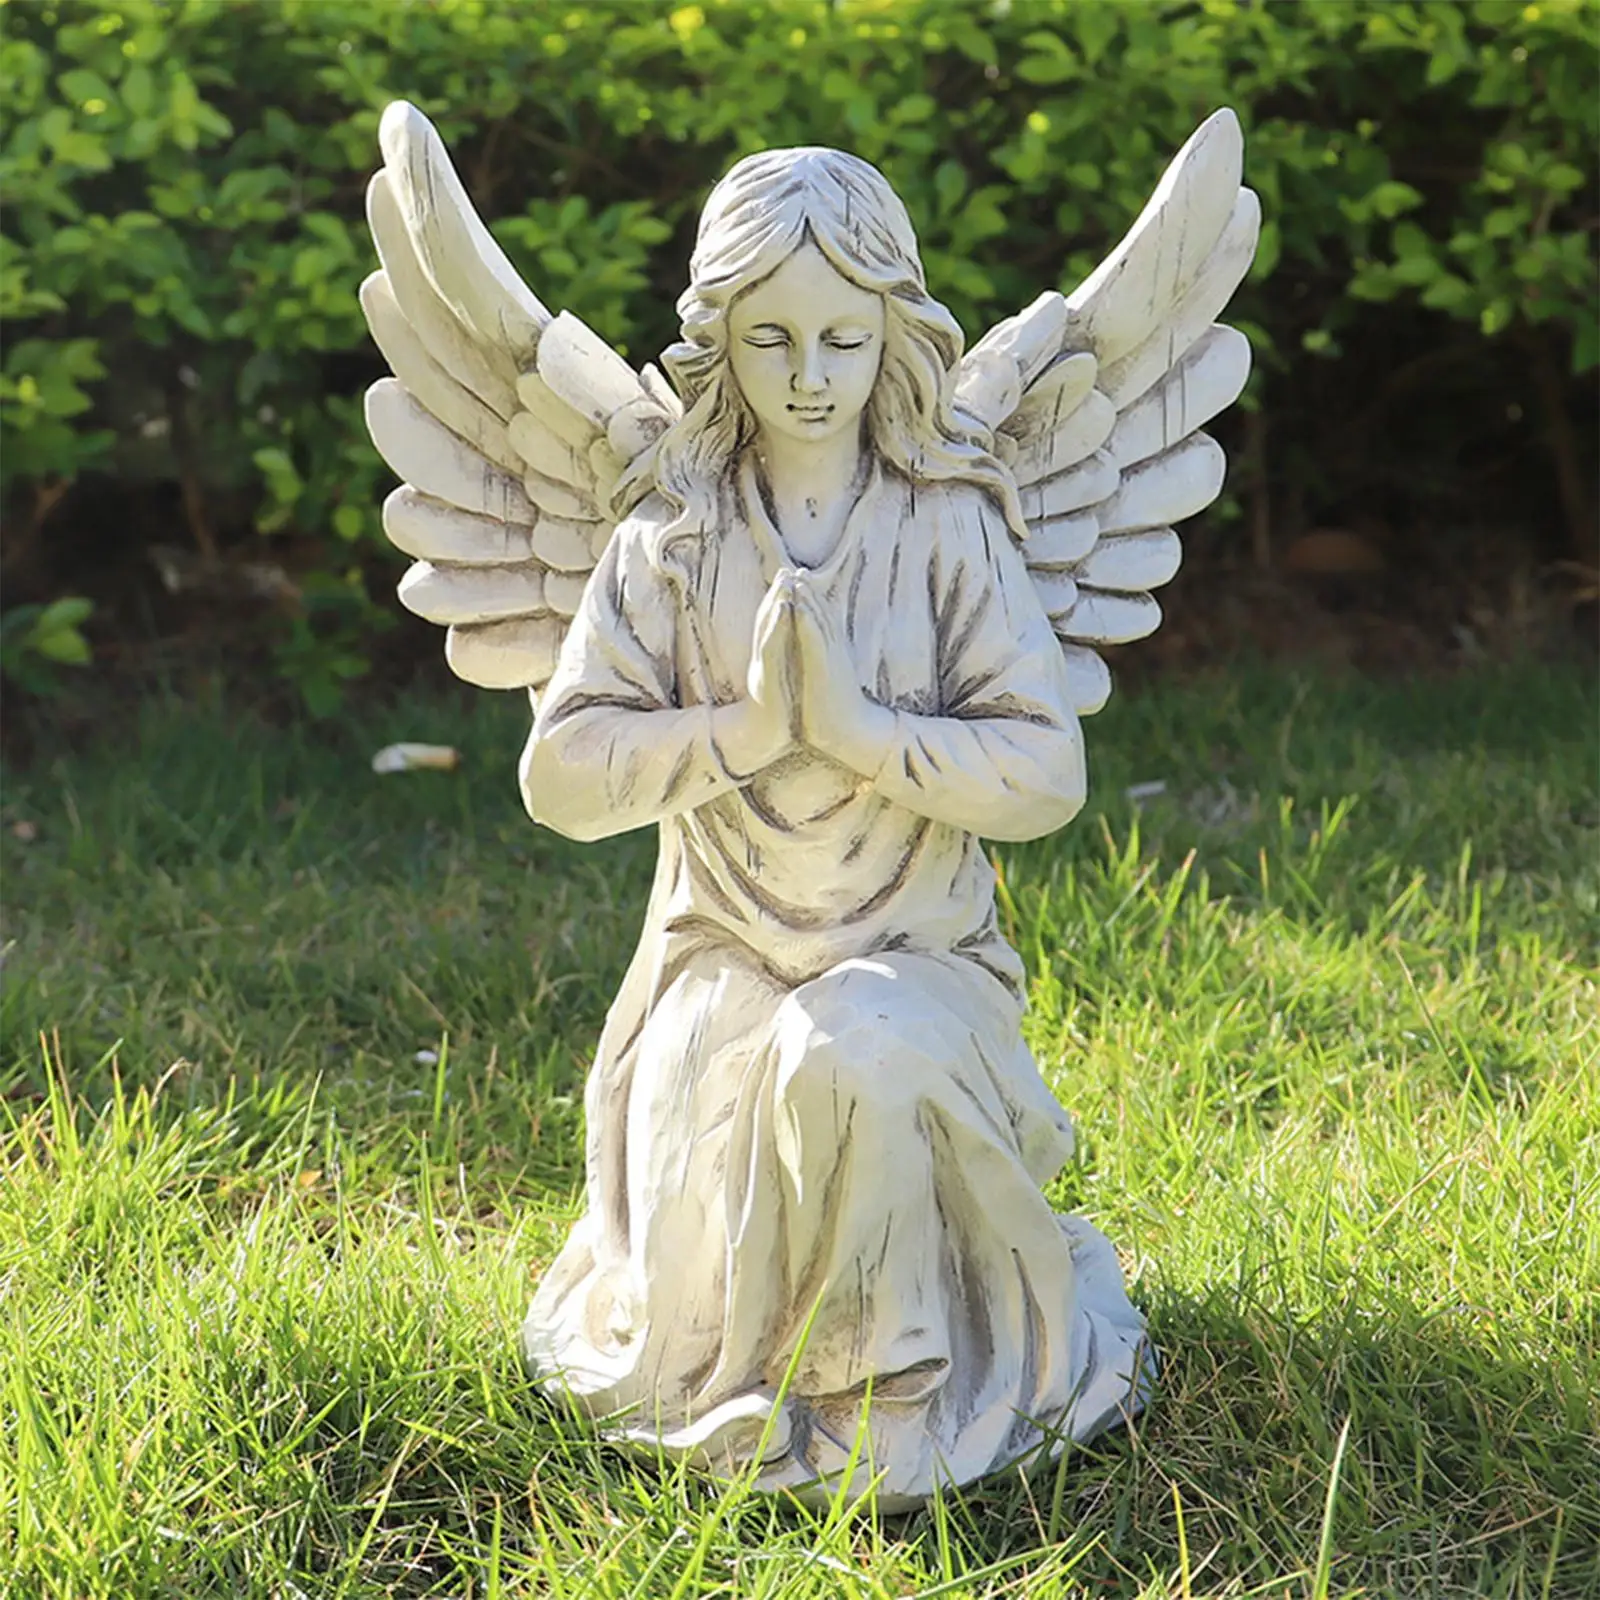  Statue, Religious Housewarming Gift Waterproof Sculpture for Patio Lawn Yard